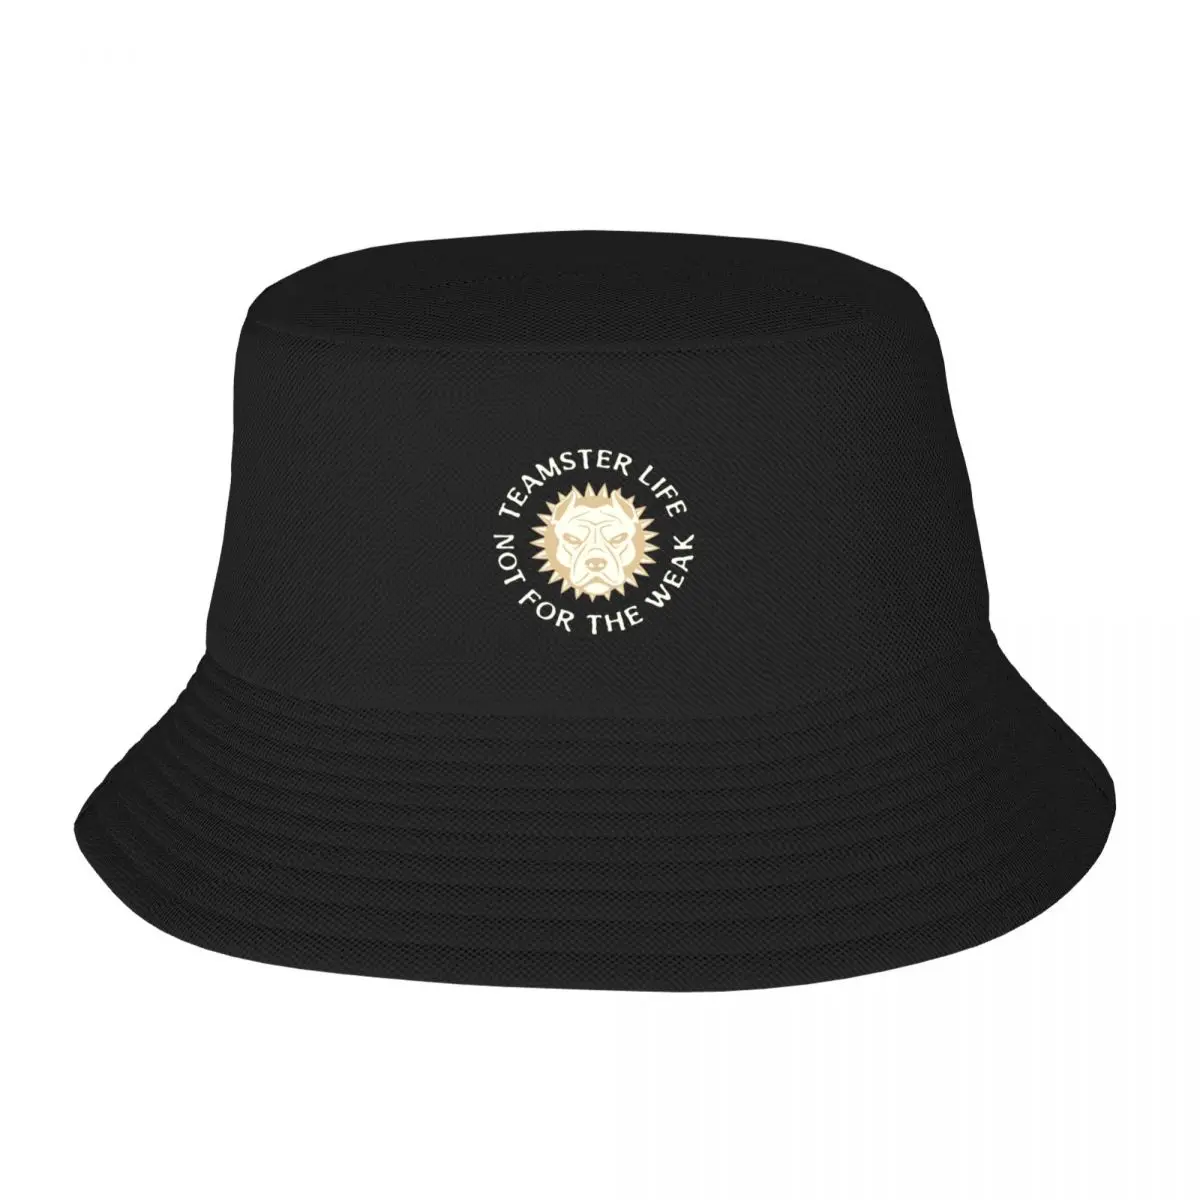 

New American Pit Bull Teamster Life Not for the Weak Bucket Hat Fishing Caps Ball Cap Beach Outing Mens Cap Women's